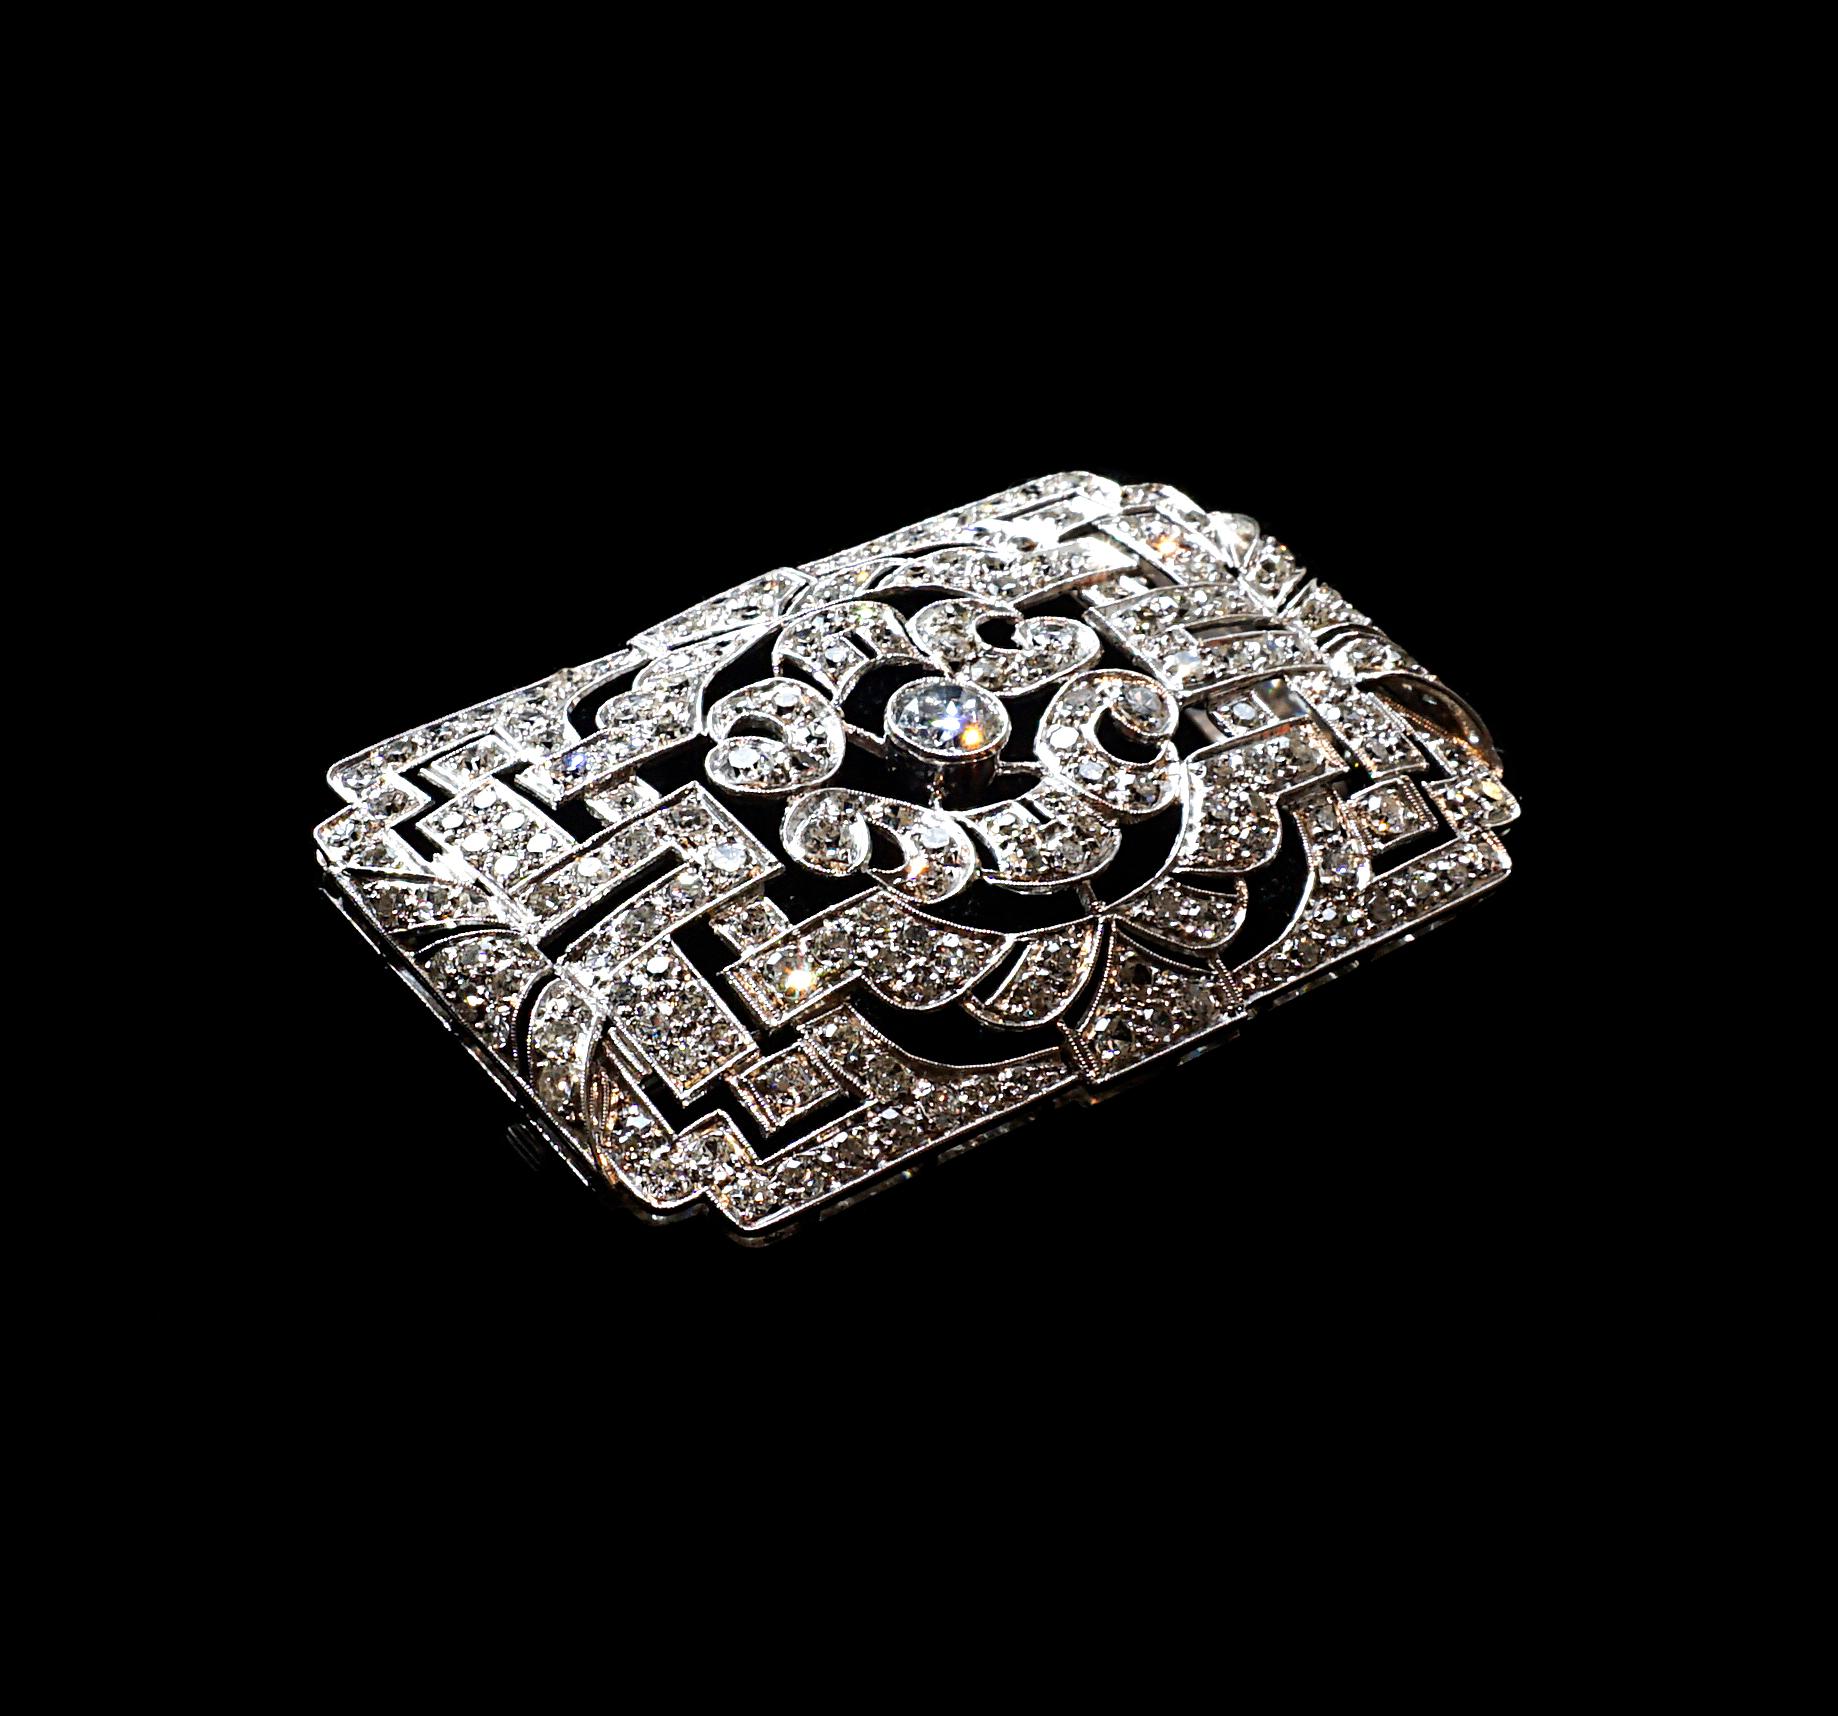 Art Déco Brooch, Platinum 950 With Diamonds Circa 7.5 Carat, Made ca 1930 In Excellent Condition For Sale In Vienna, AT